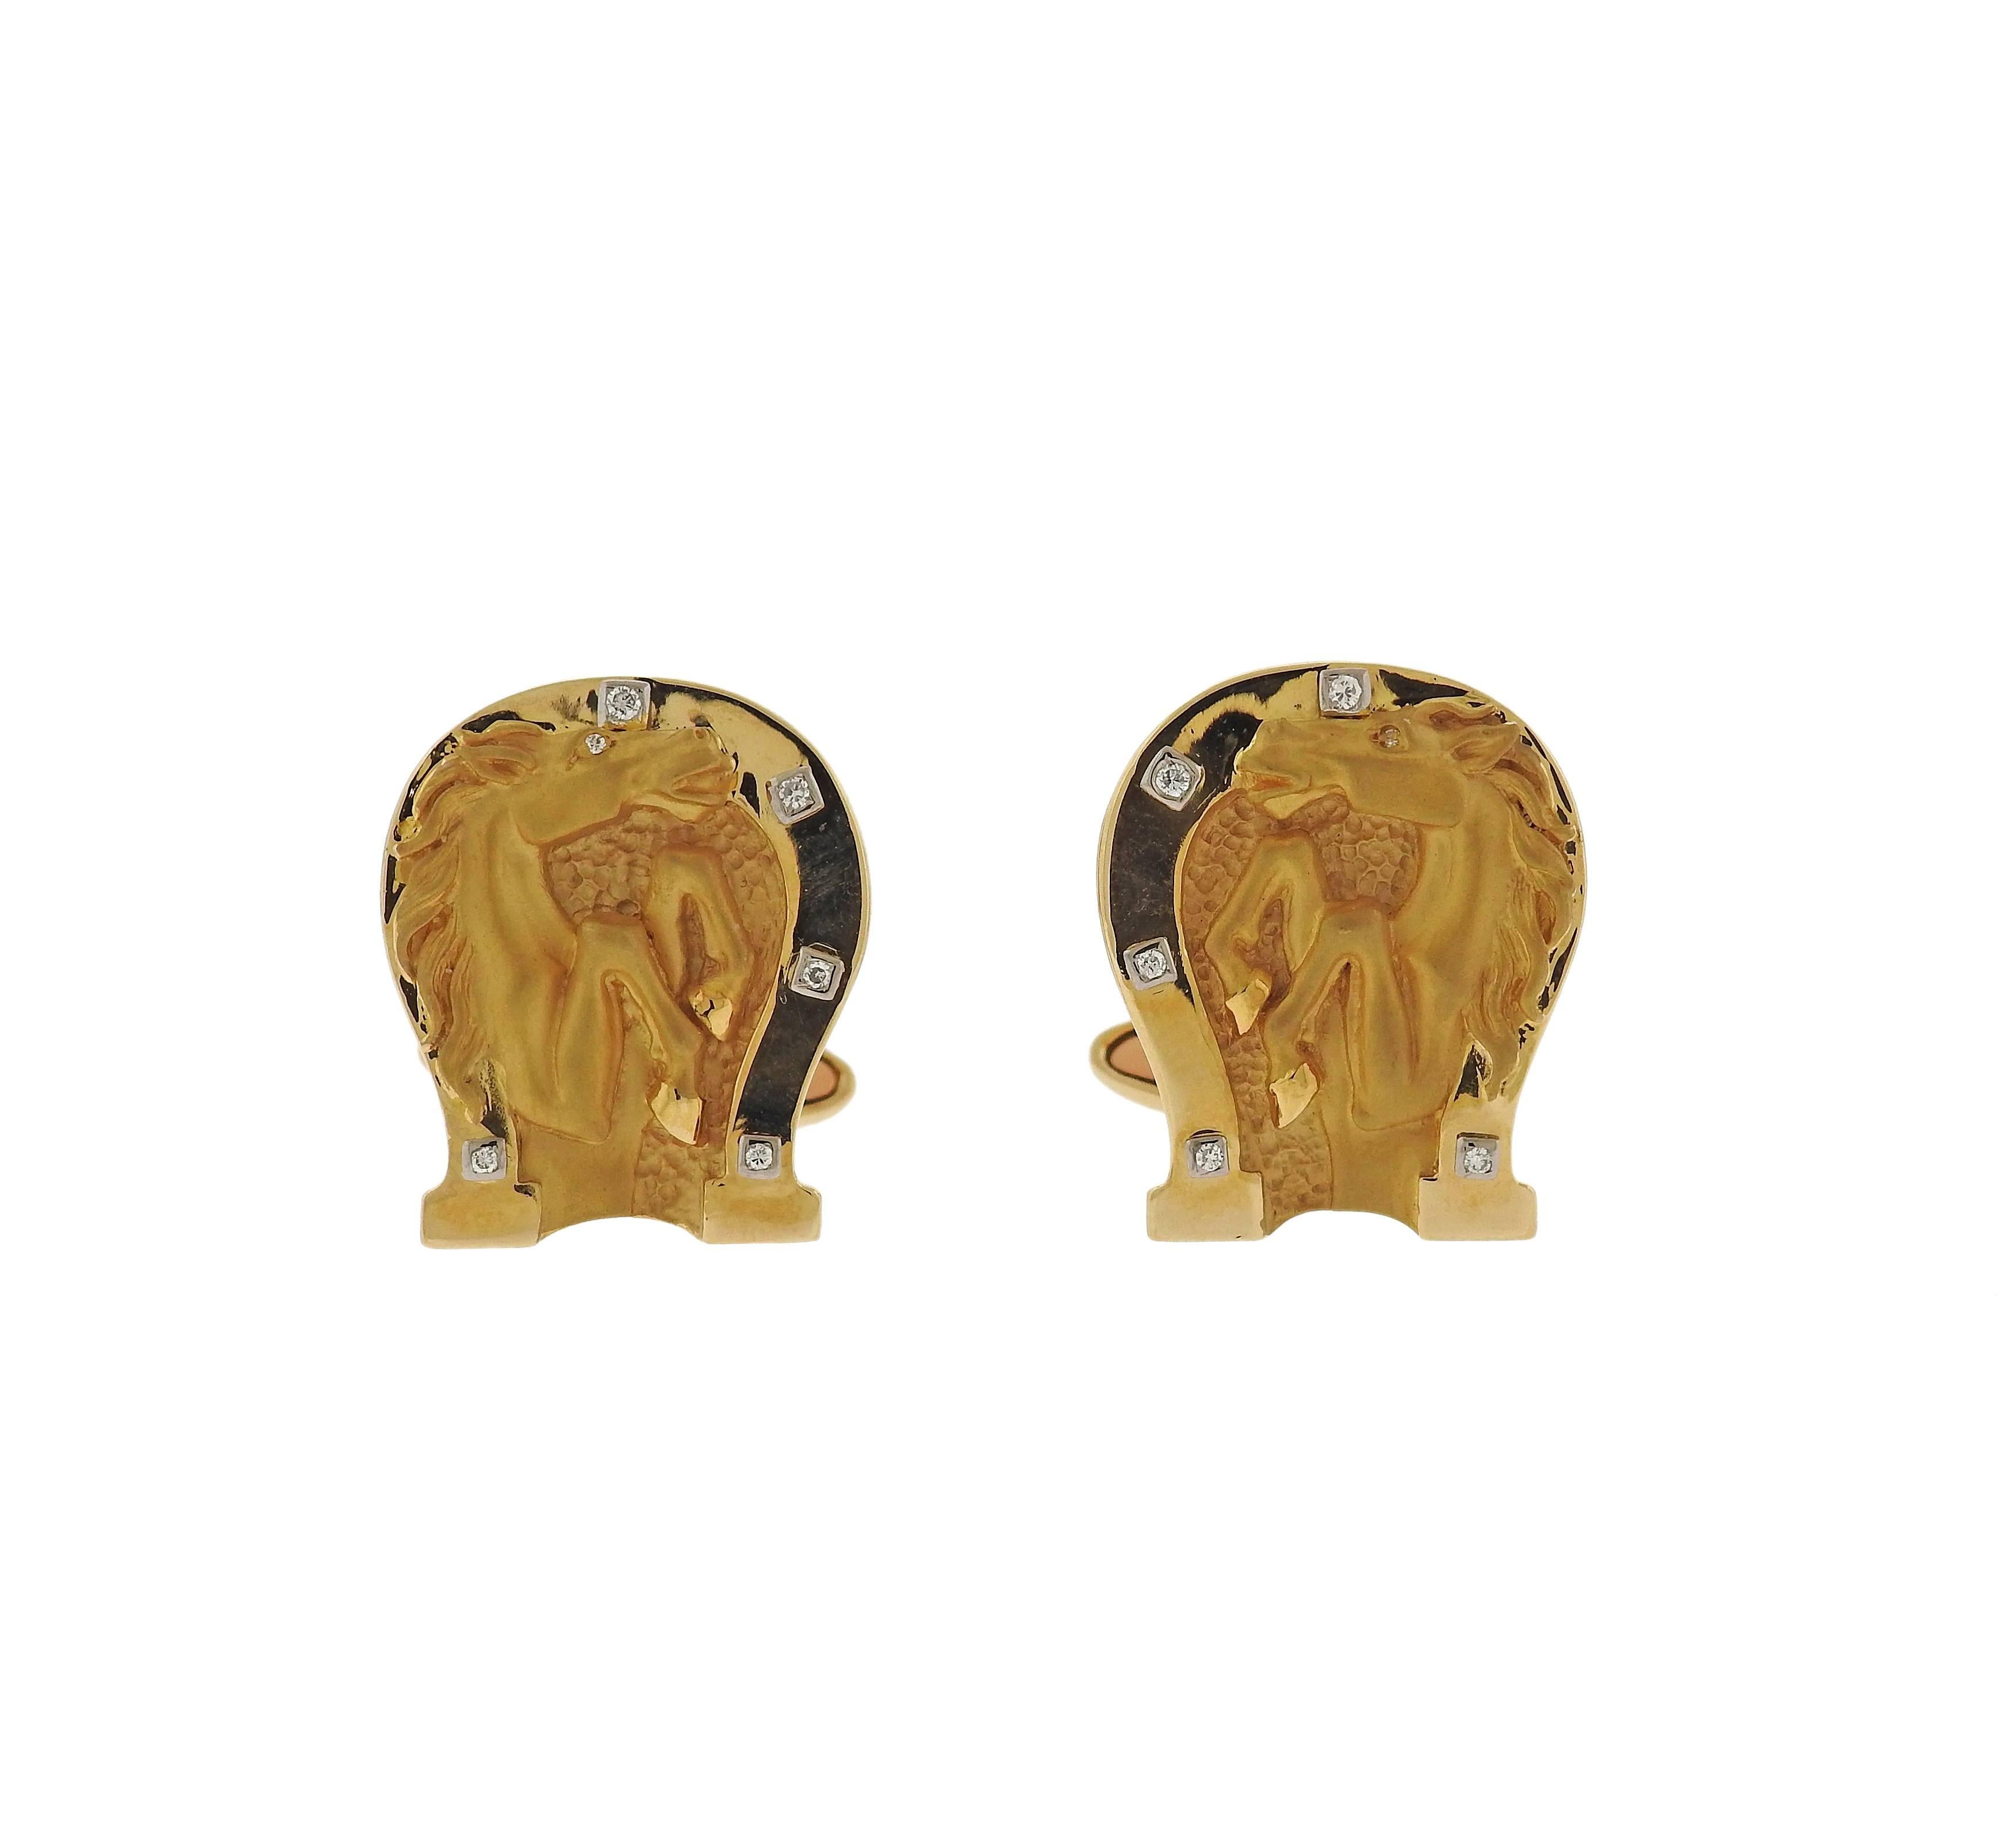 Pair of 18k yellow gold horse shoe cufflinks, featuring horse head image in the center. Decorated with diamonds. Cufflink top measures 21mm x 18mm. Marked: Cc mark, 750. Weight - 19 grams 